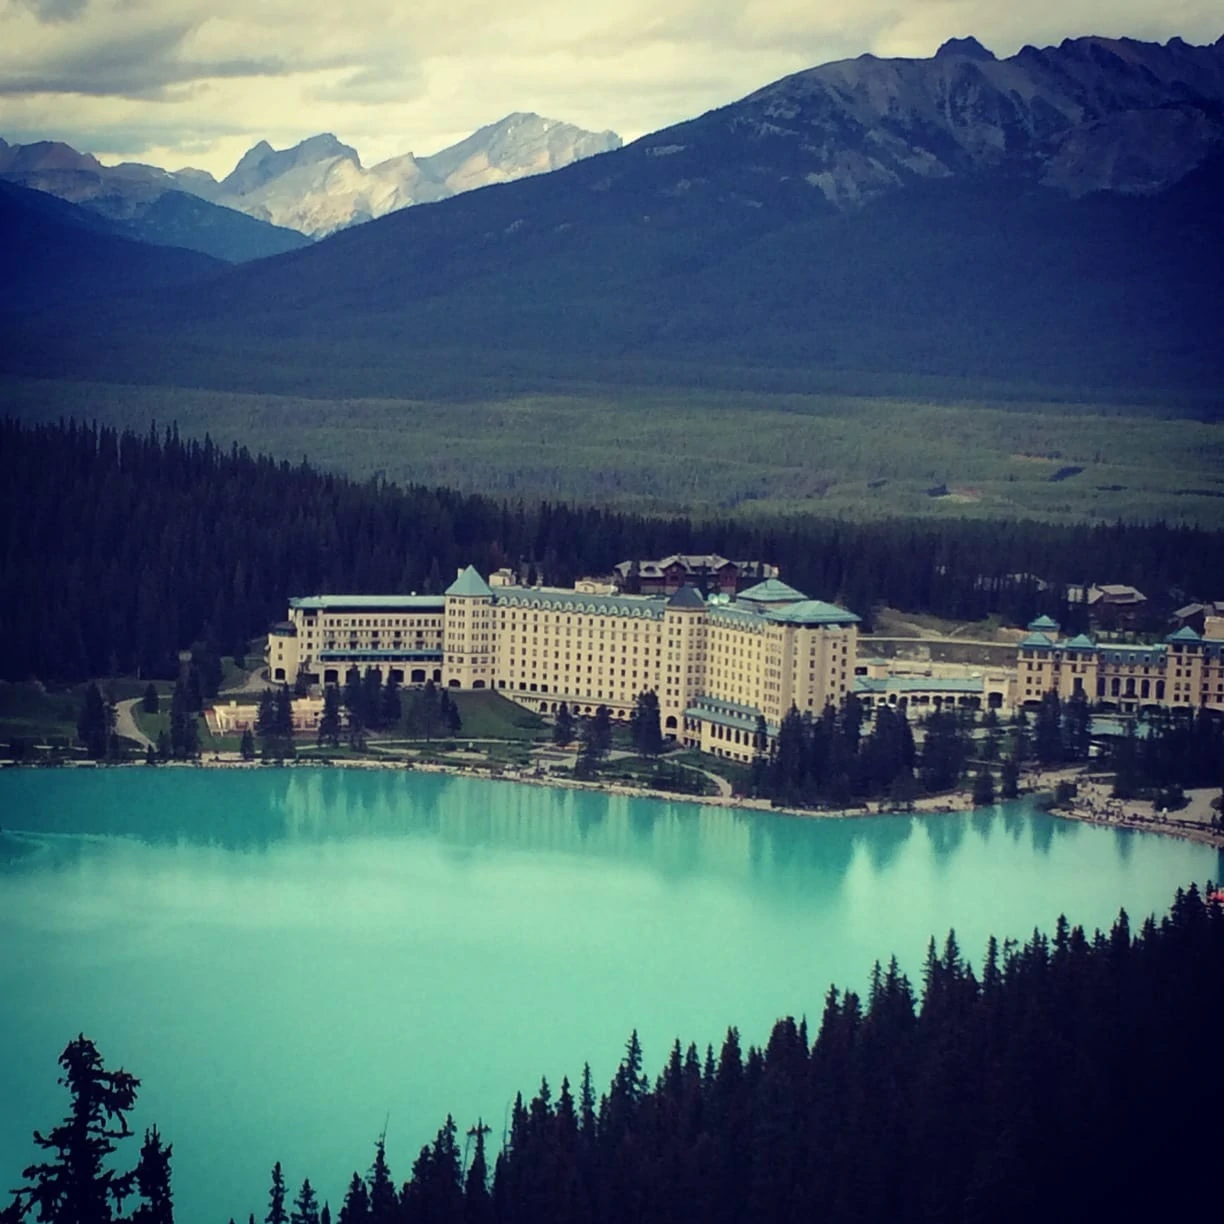 How to Use Trover - picture shared on Trover of Lake Louise